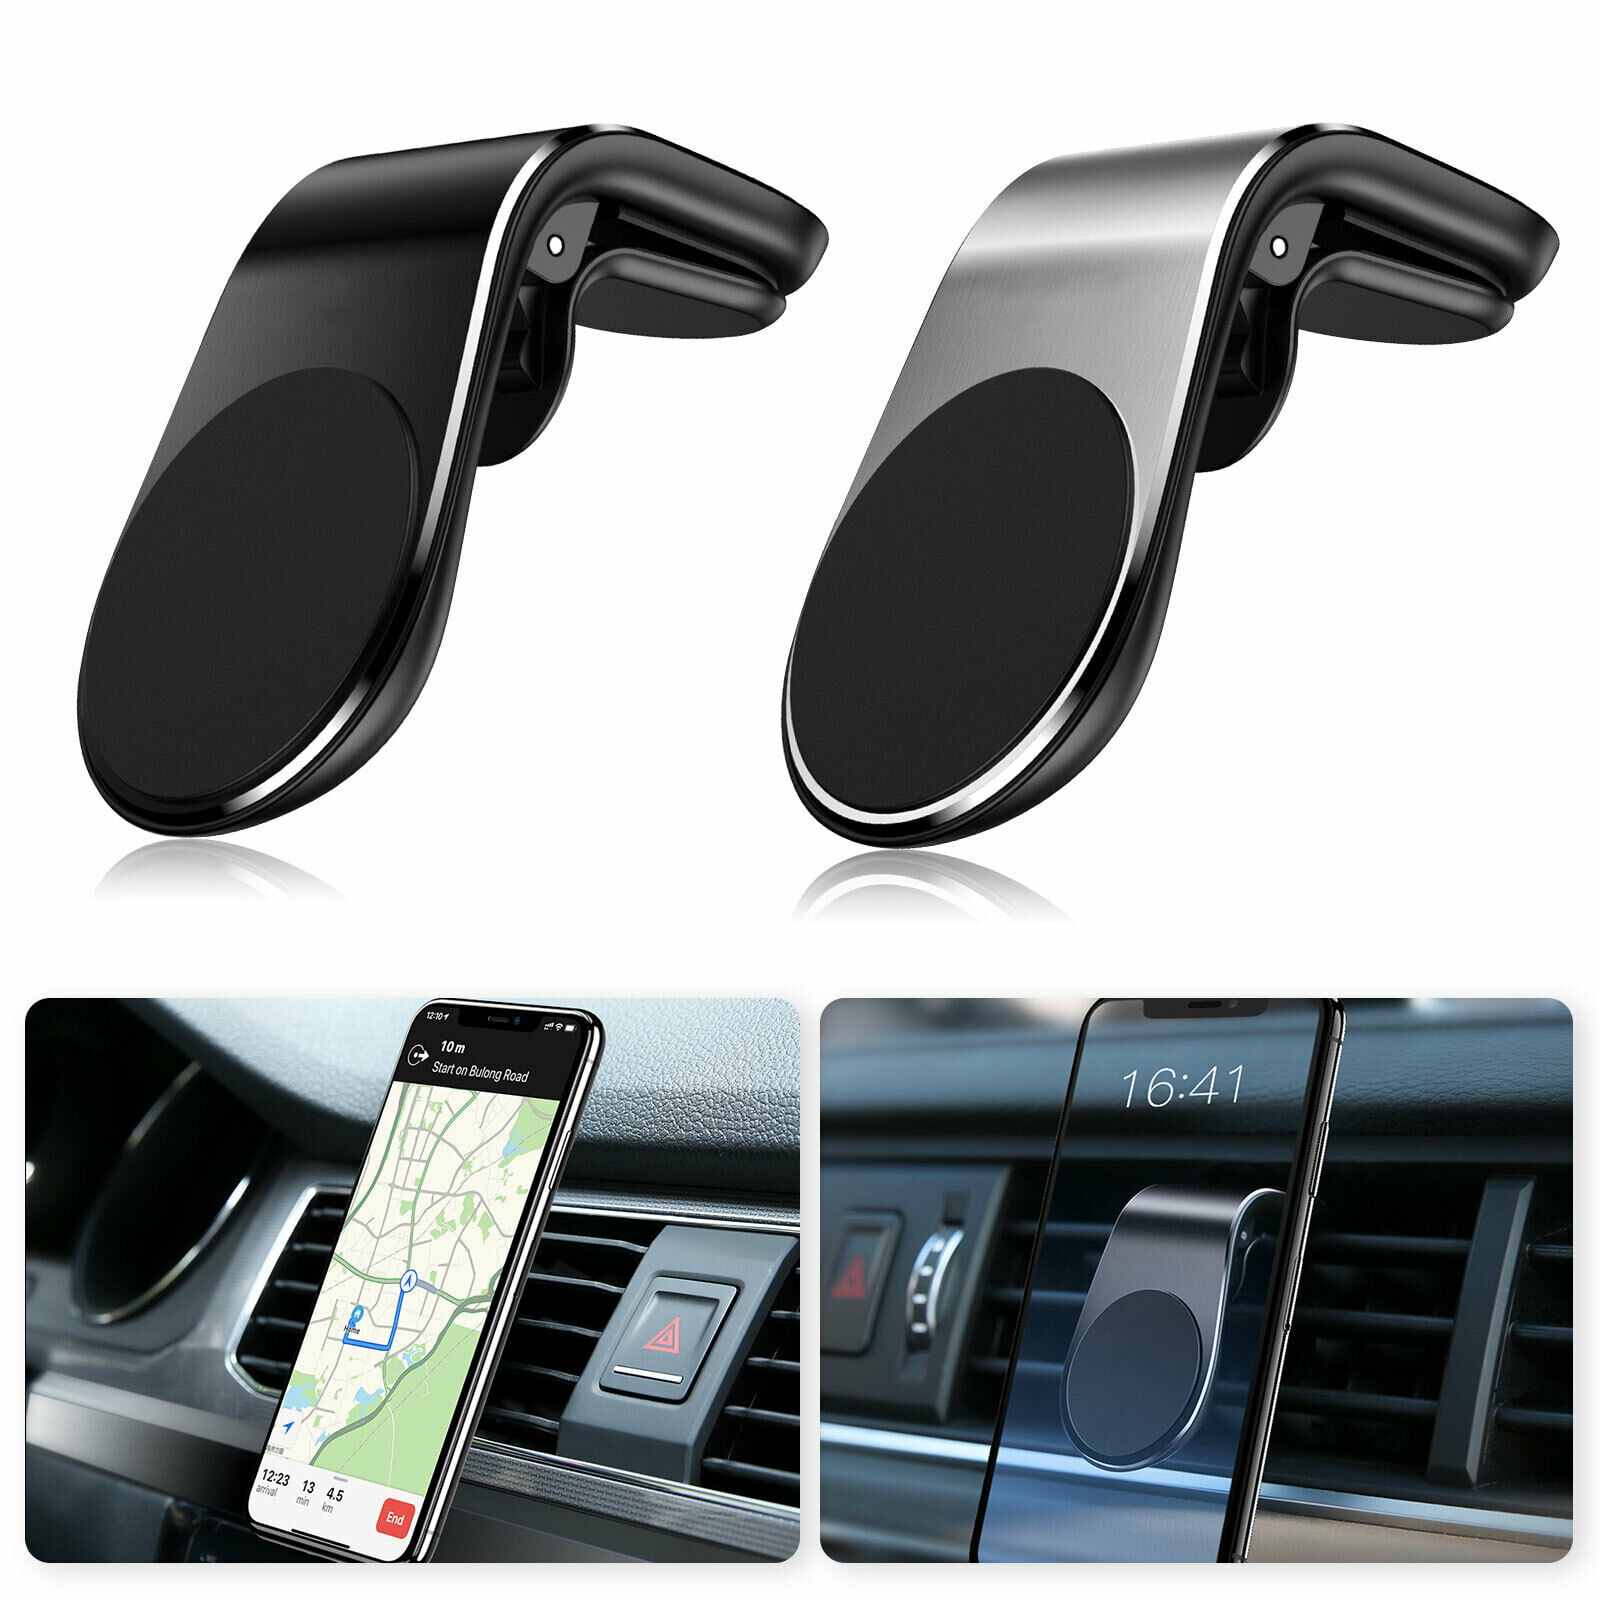 Universal Suction Cup Dashboard & Windshield Pop Grips Phone Mount Pop Clip Car Mount Phone Holder 360 Degree Adjustable Air Vent Pop Holder for iPhone11 Pro Max XR Xs X 8 7 Plus Galaxy Note10 9 S10 